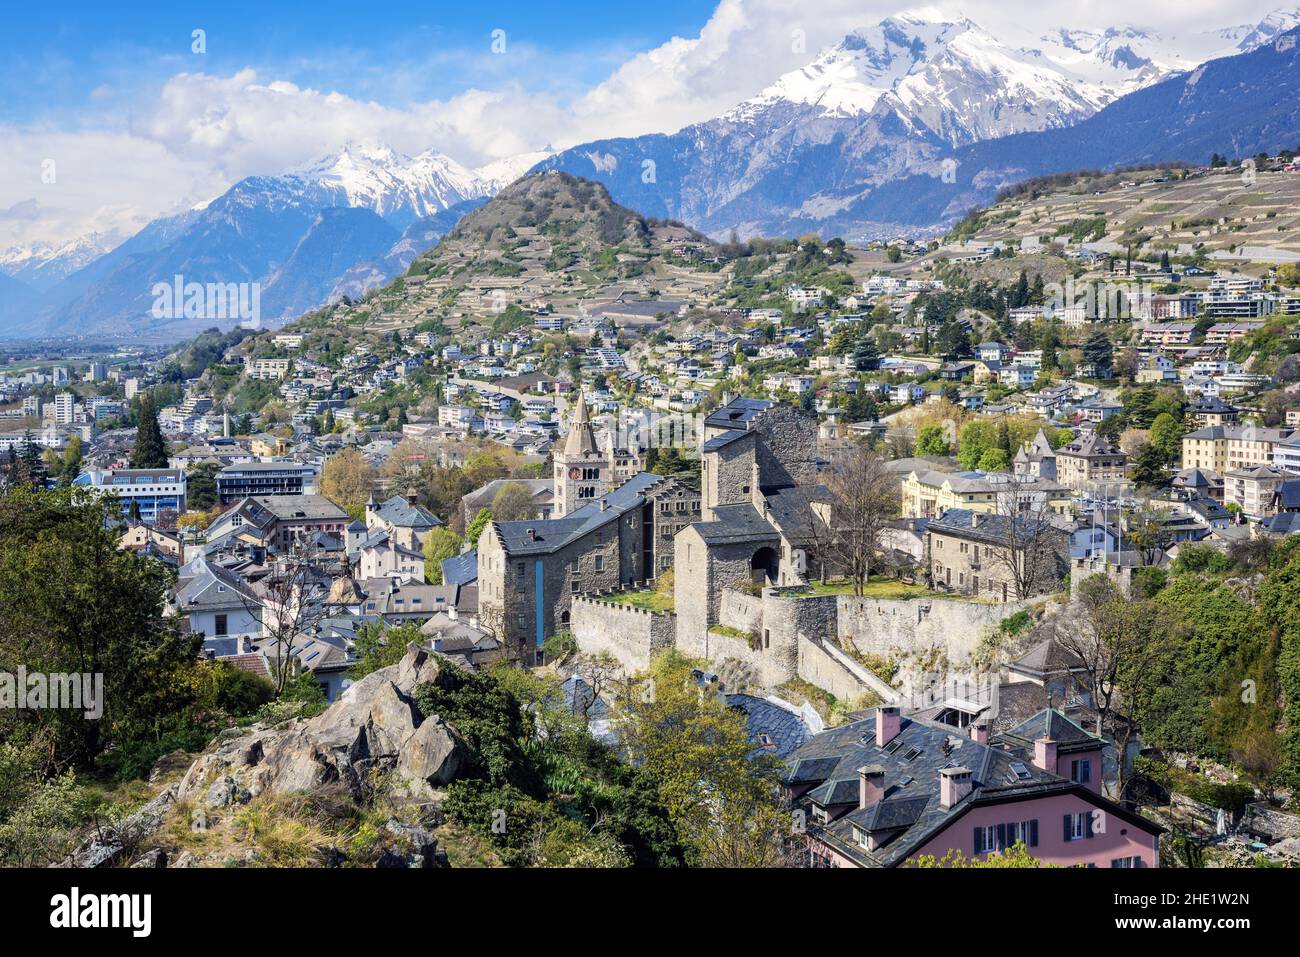 Historical Sion town in the Rhone river valley in the Alps mountains is the capital city of canton Valais, Switzerland Stock Photo